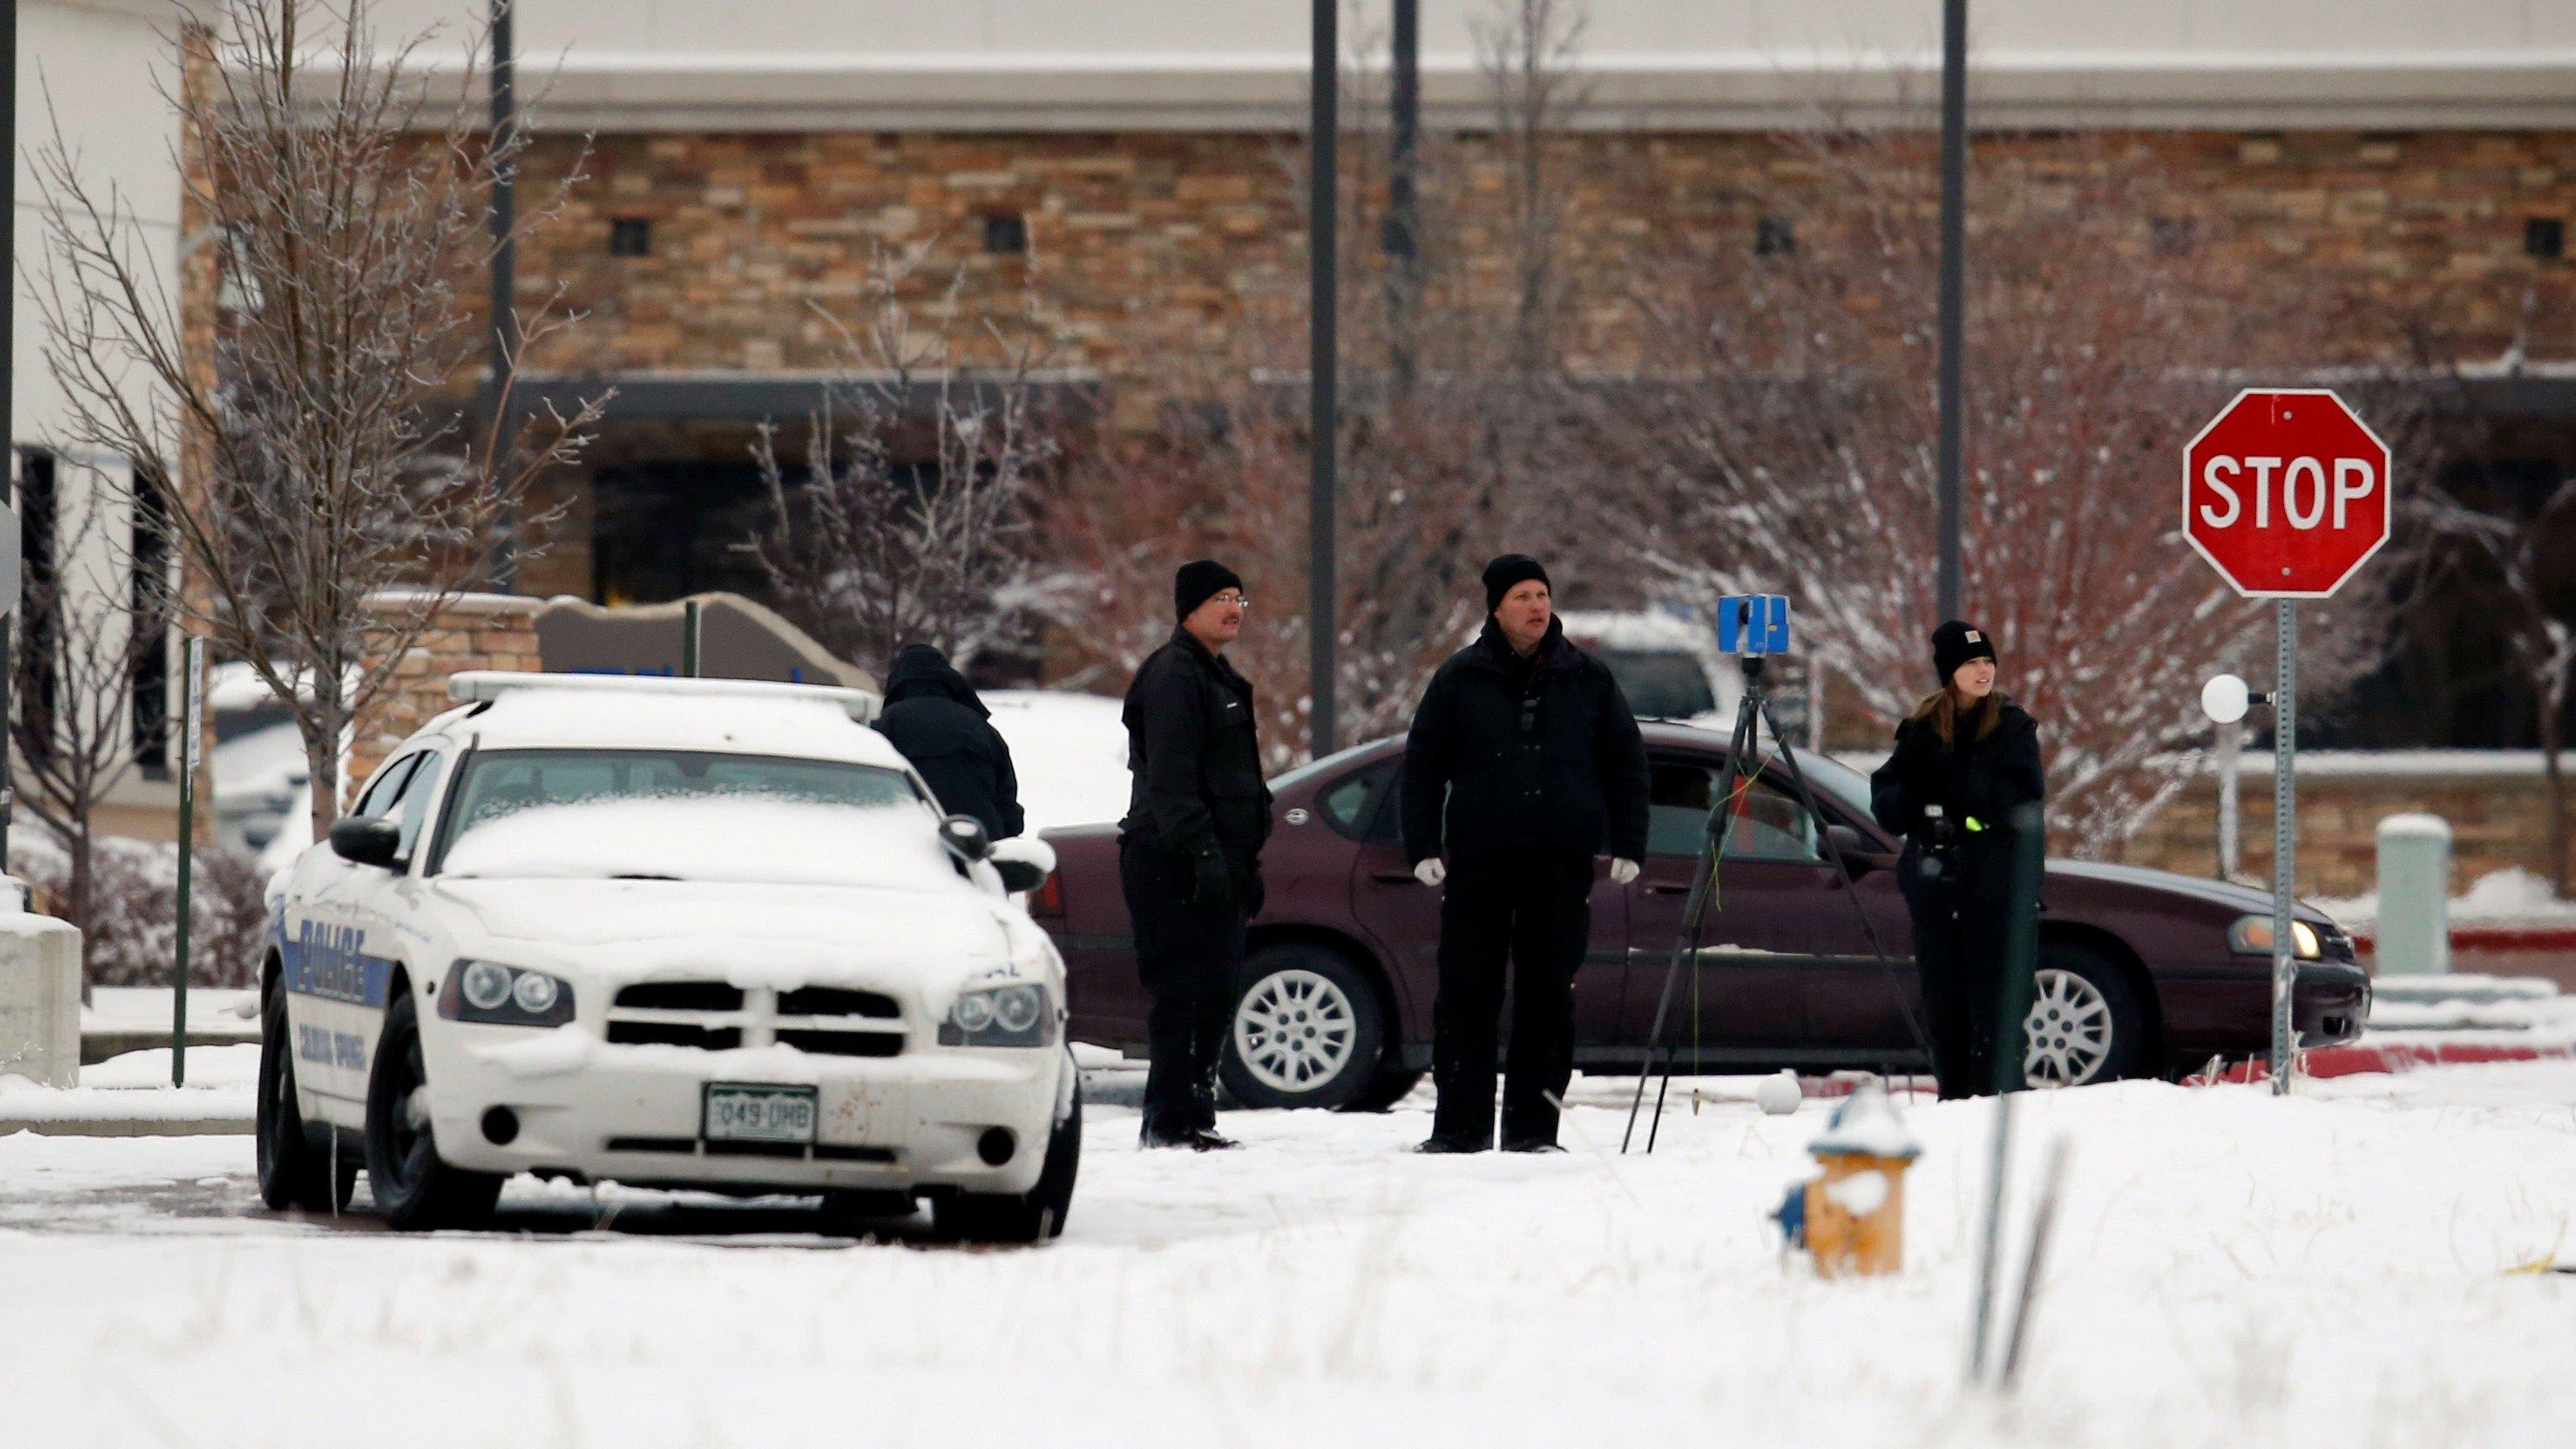 Did left rush to judgment in Planned Parenthood shootings?